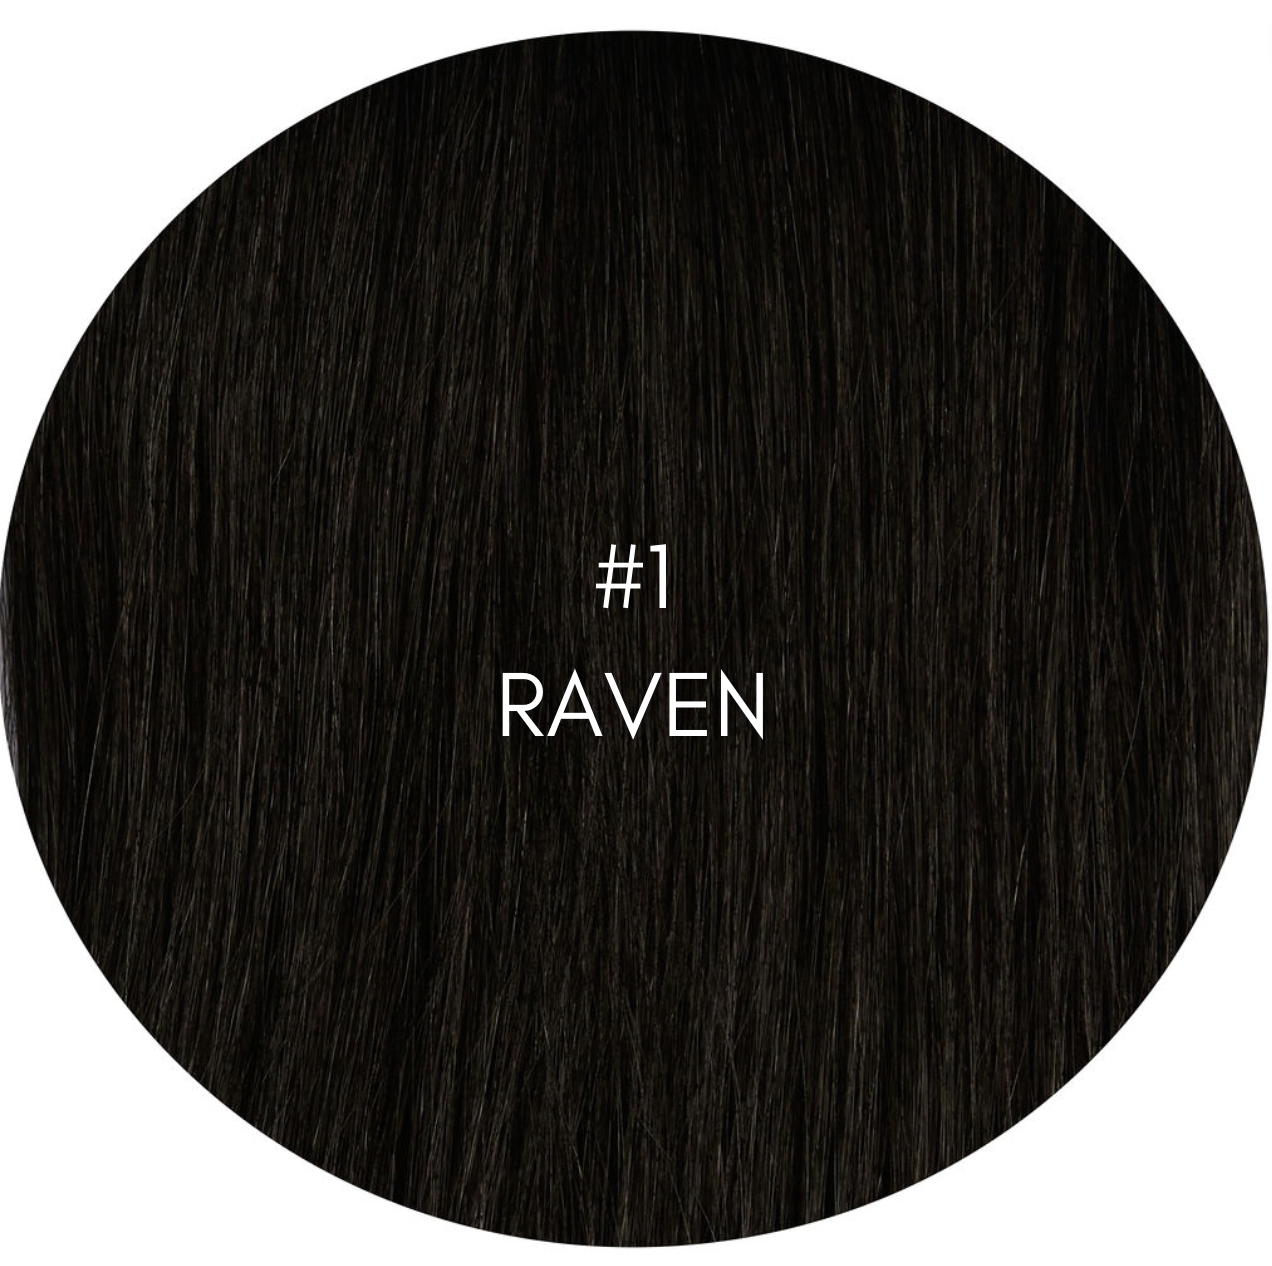 Invisi wefts